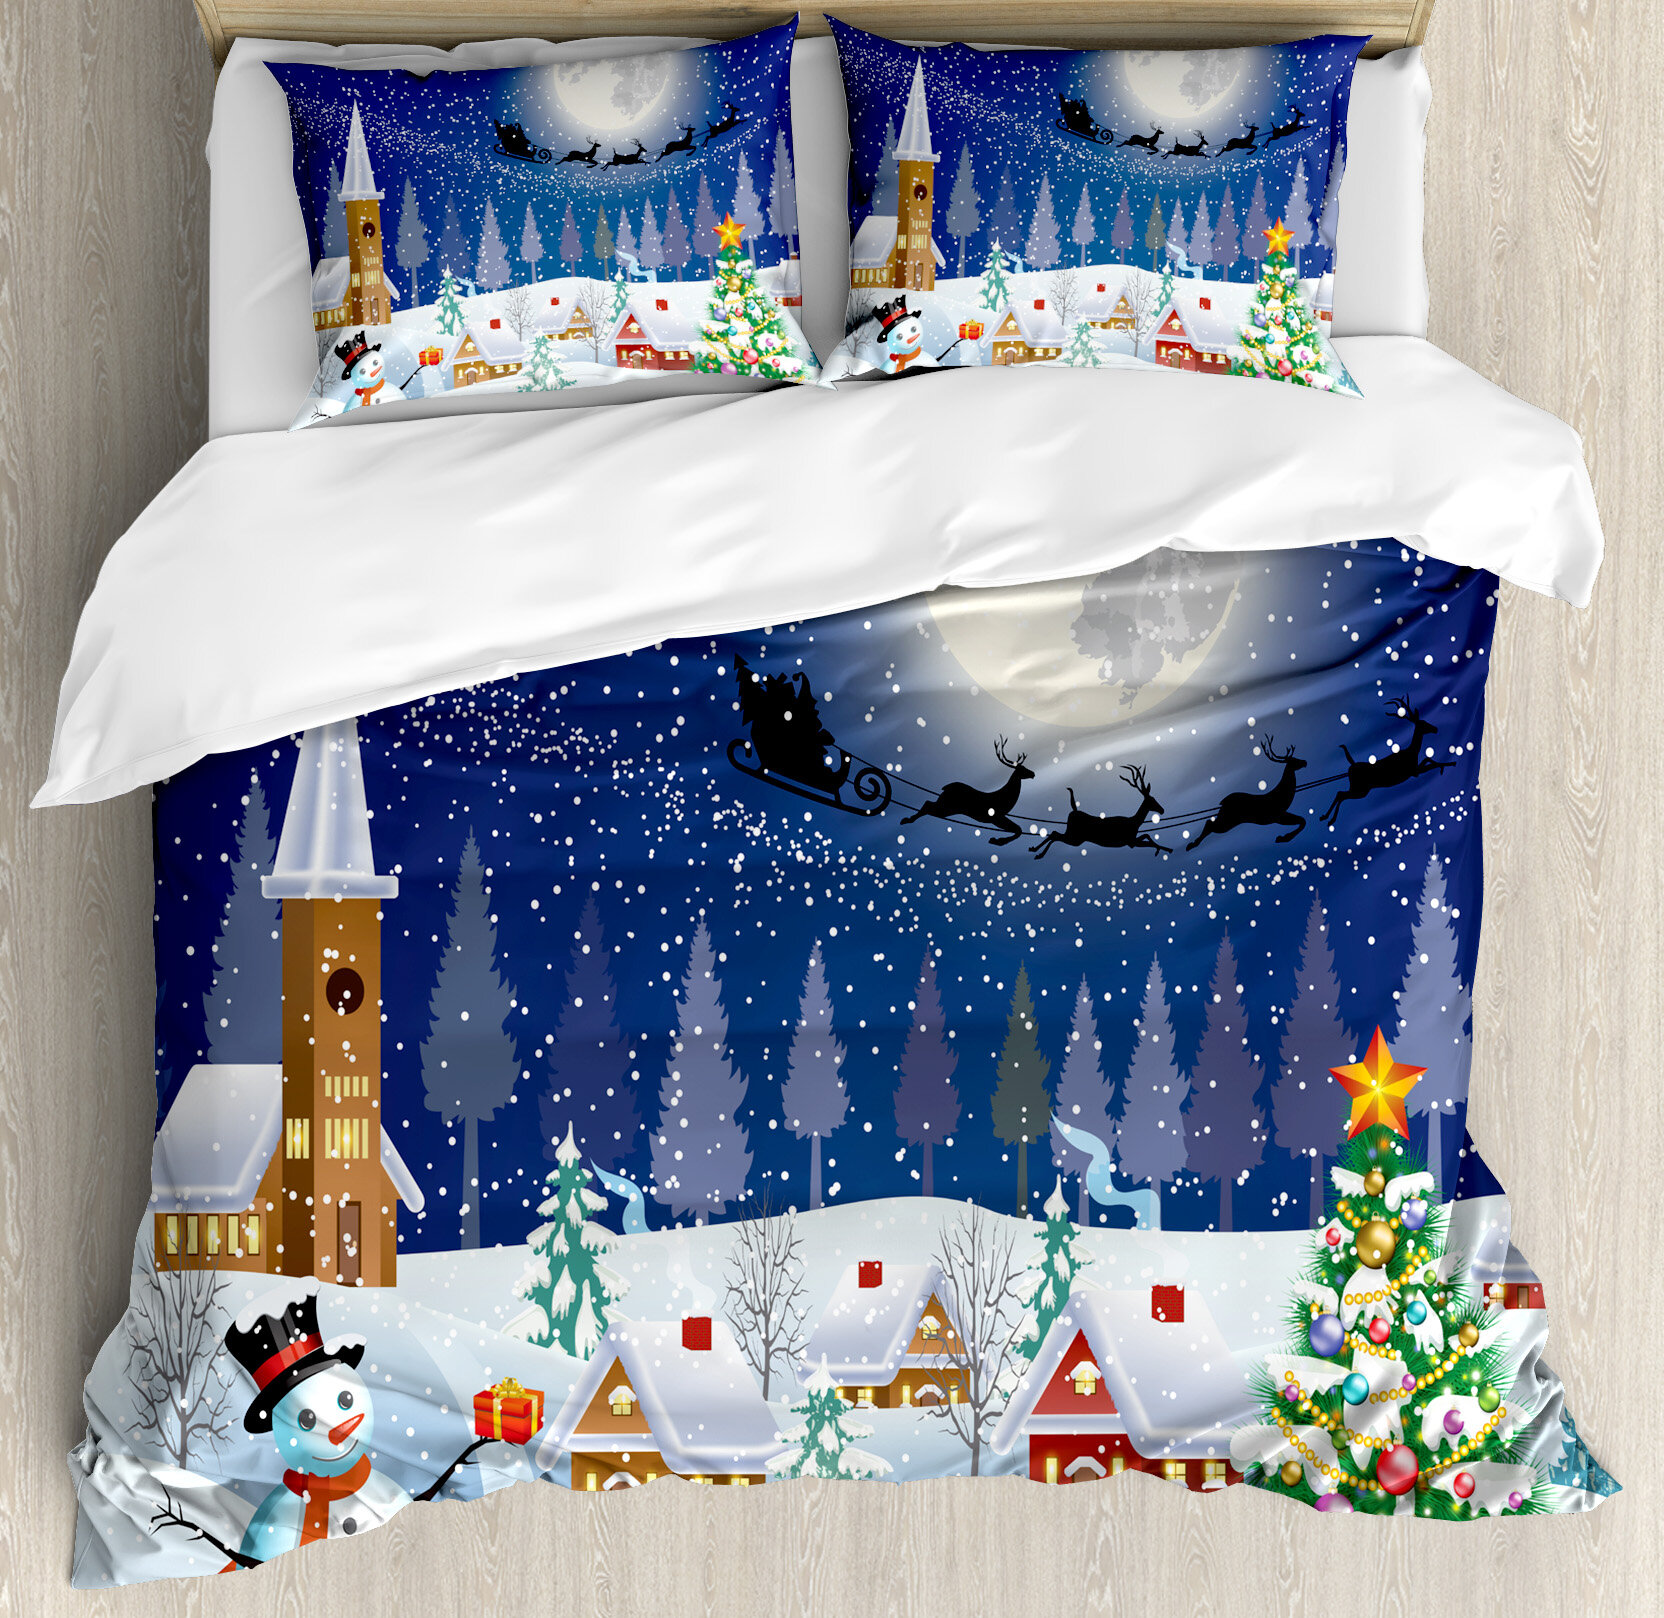 Festive Snowman and Snowflake Blue Sheet Set Cheerful Holiday Bedding for Any Size Bed